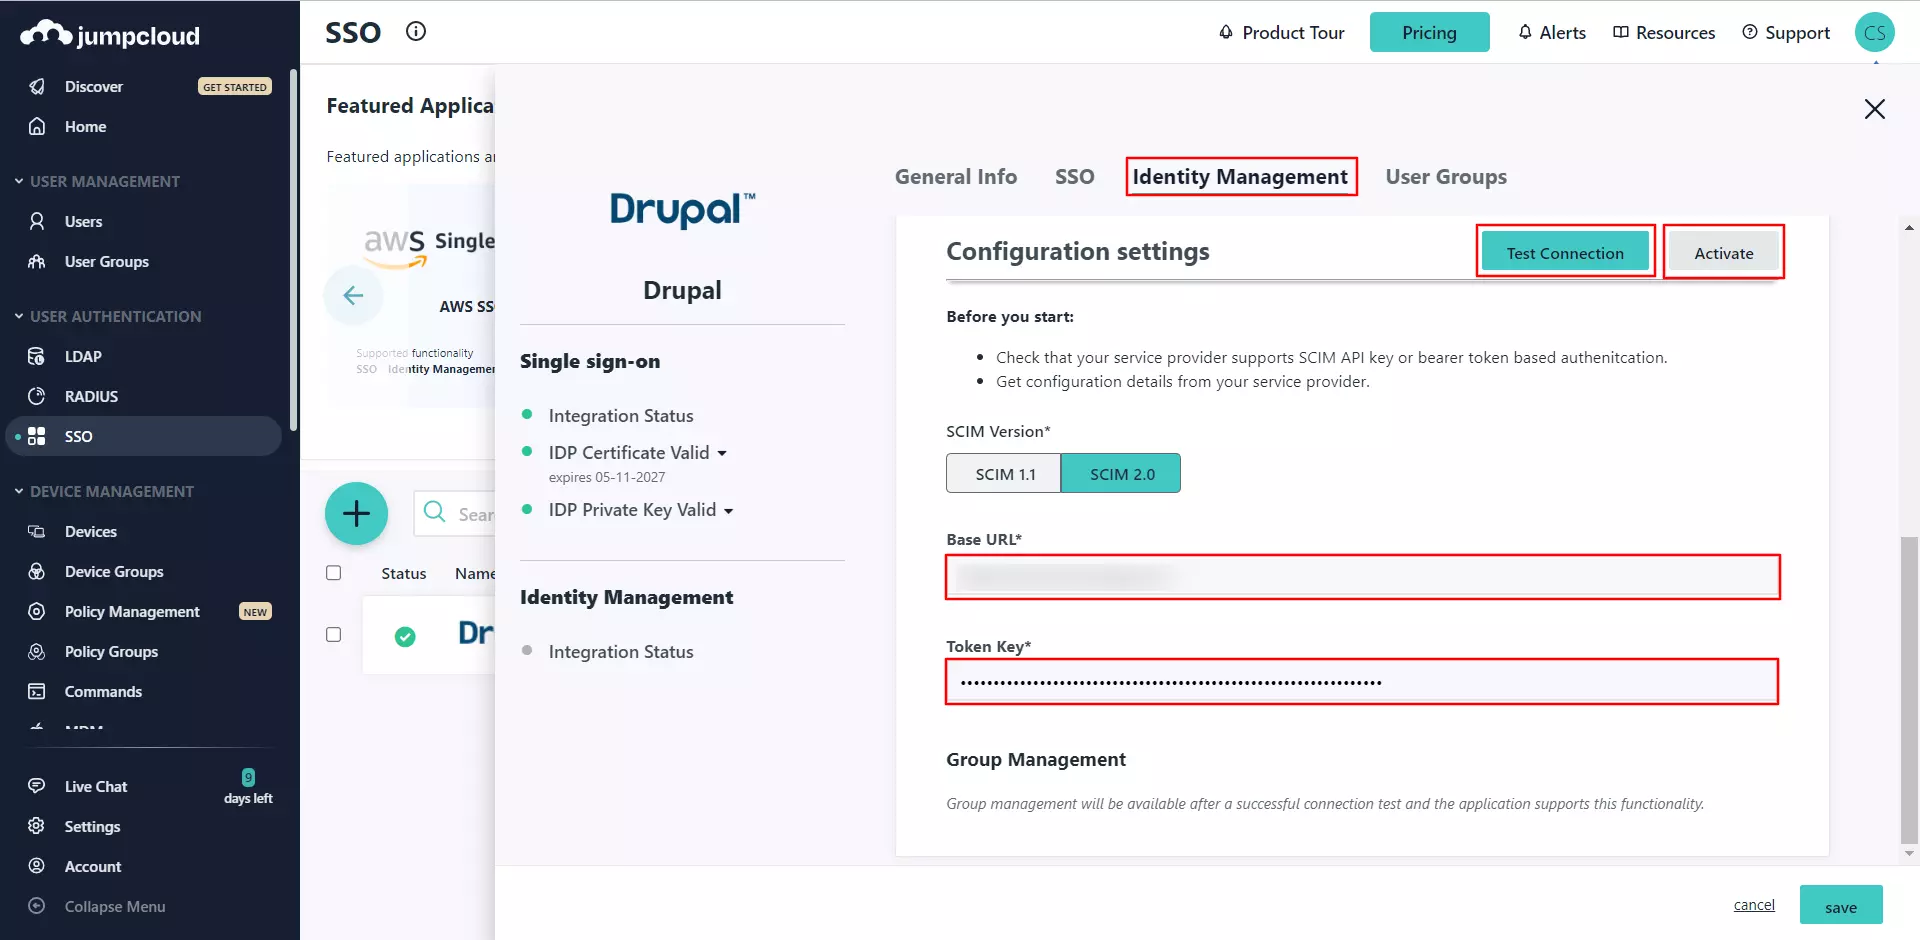 jumcloud scim user provisiong - go to identity managementtab and enter base url & token key